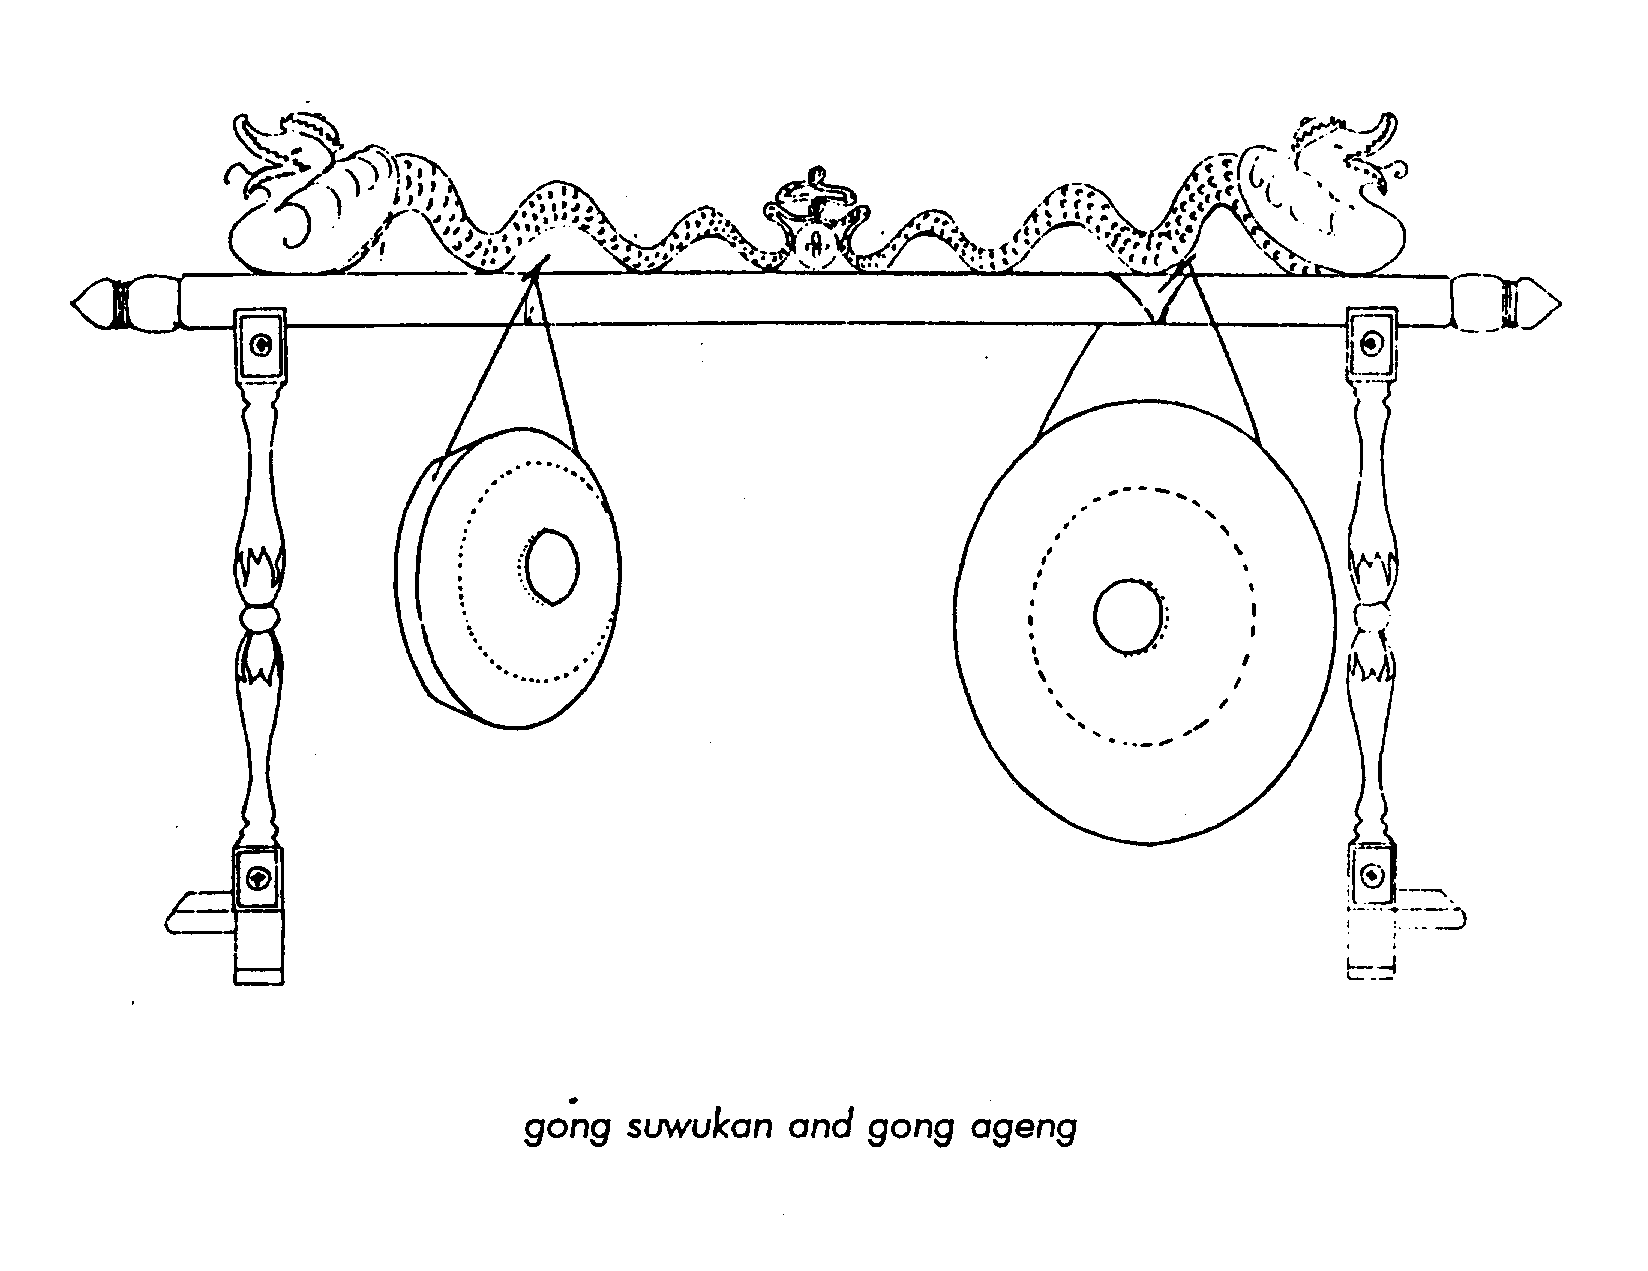 Image of a Gong